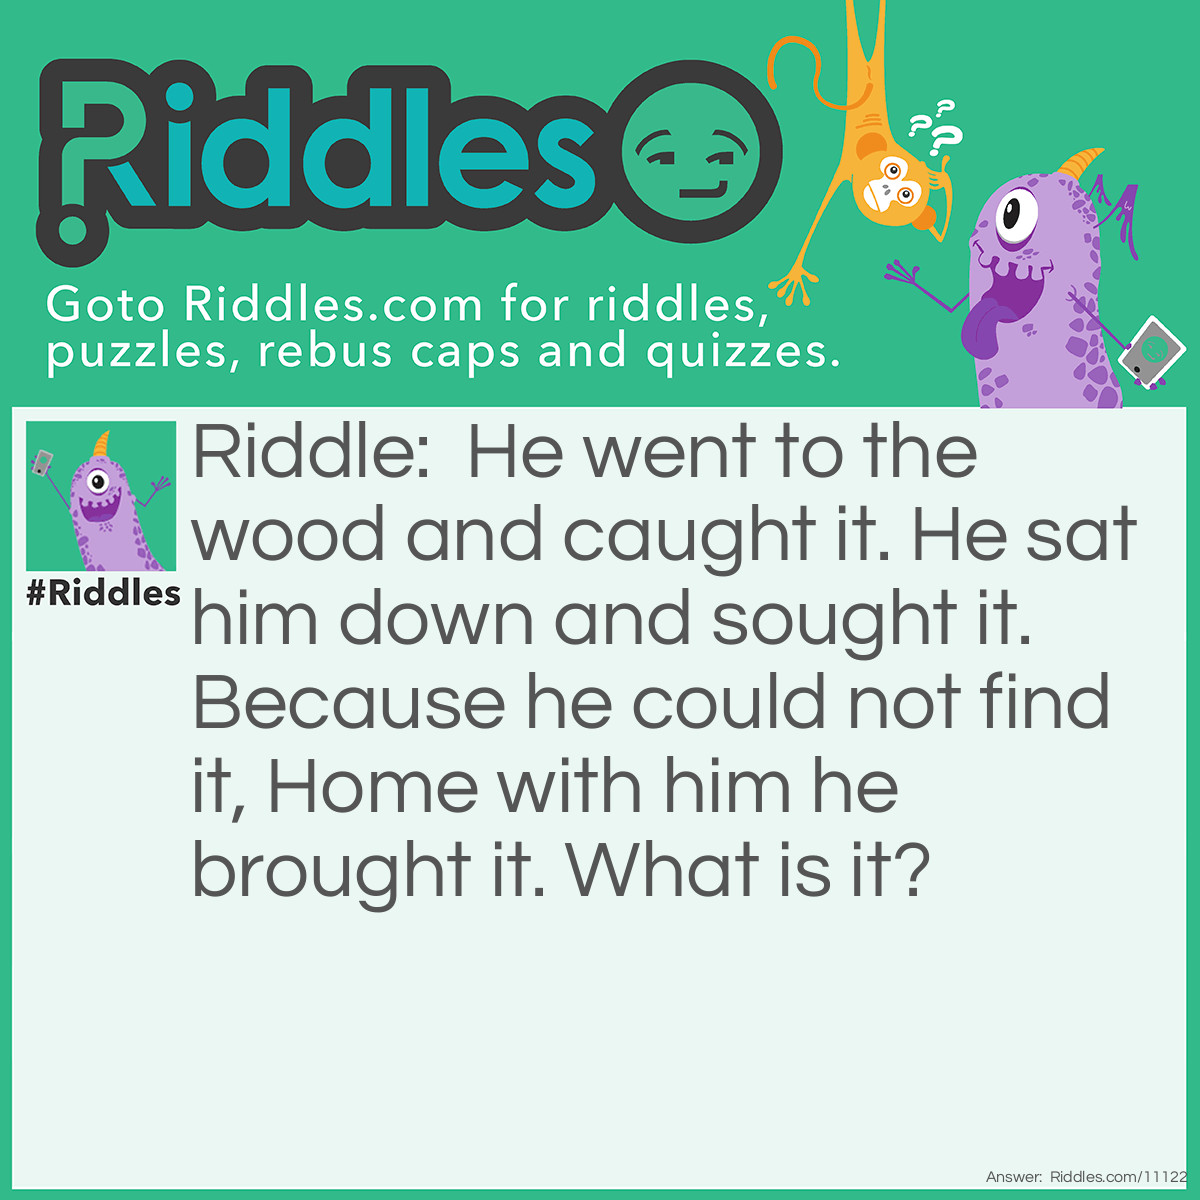 Riddle: He went to the wood and caught it. He sat him down and sought it. Because he could not find it, Home with him he brought it. What is it? Answer: A Splinter.